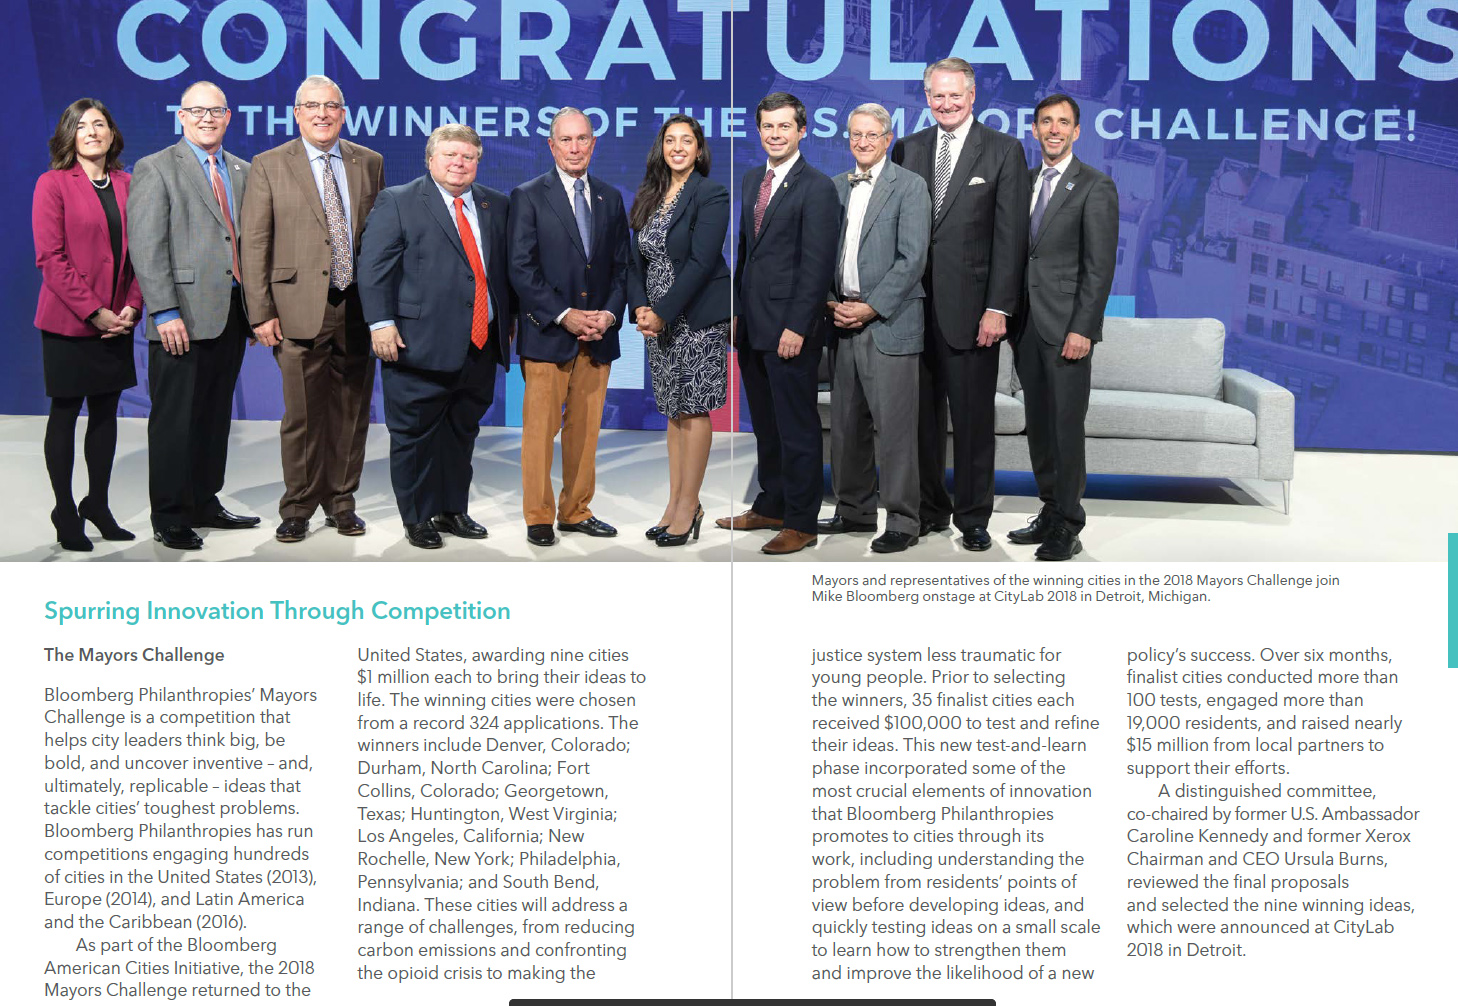 PHOTO: Michael Bloomberg appears in a photo with then-Mayor Pete Buttigieg and other mayors and city representatives in a photo from the Bloomberg Philanthropies 2019 Annual Report.